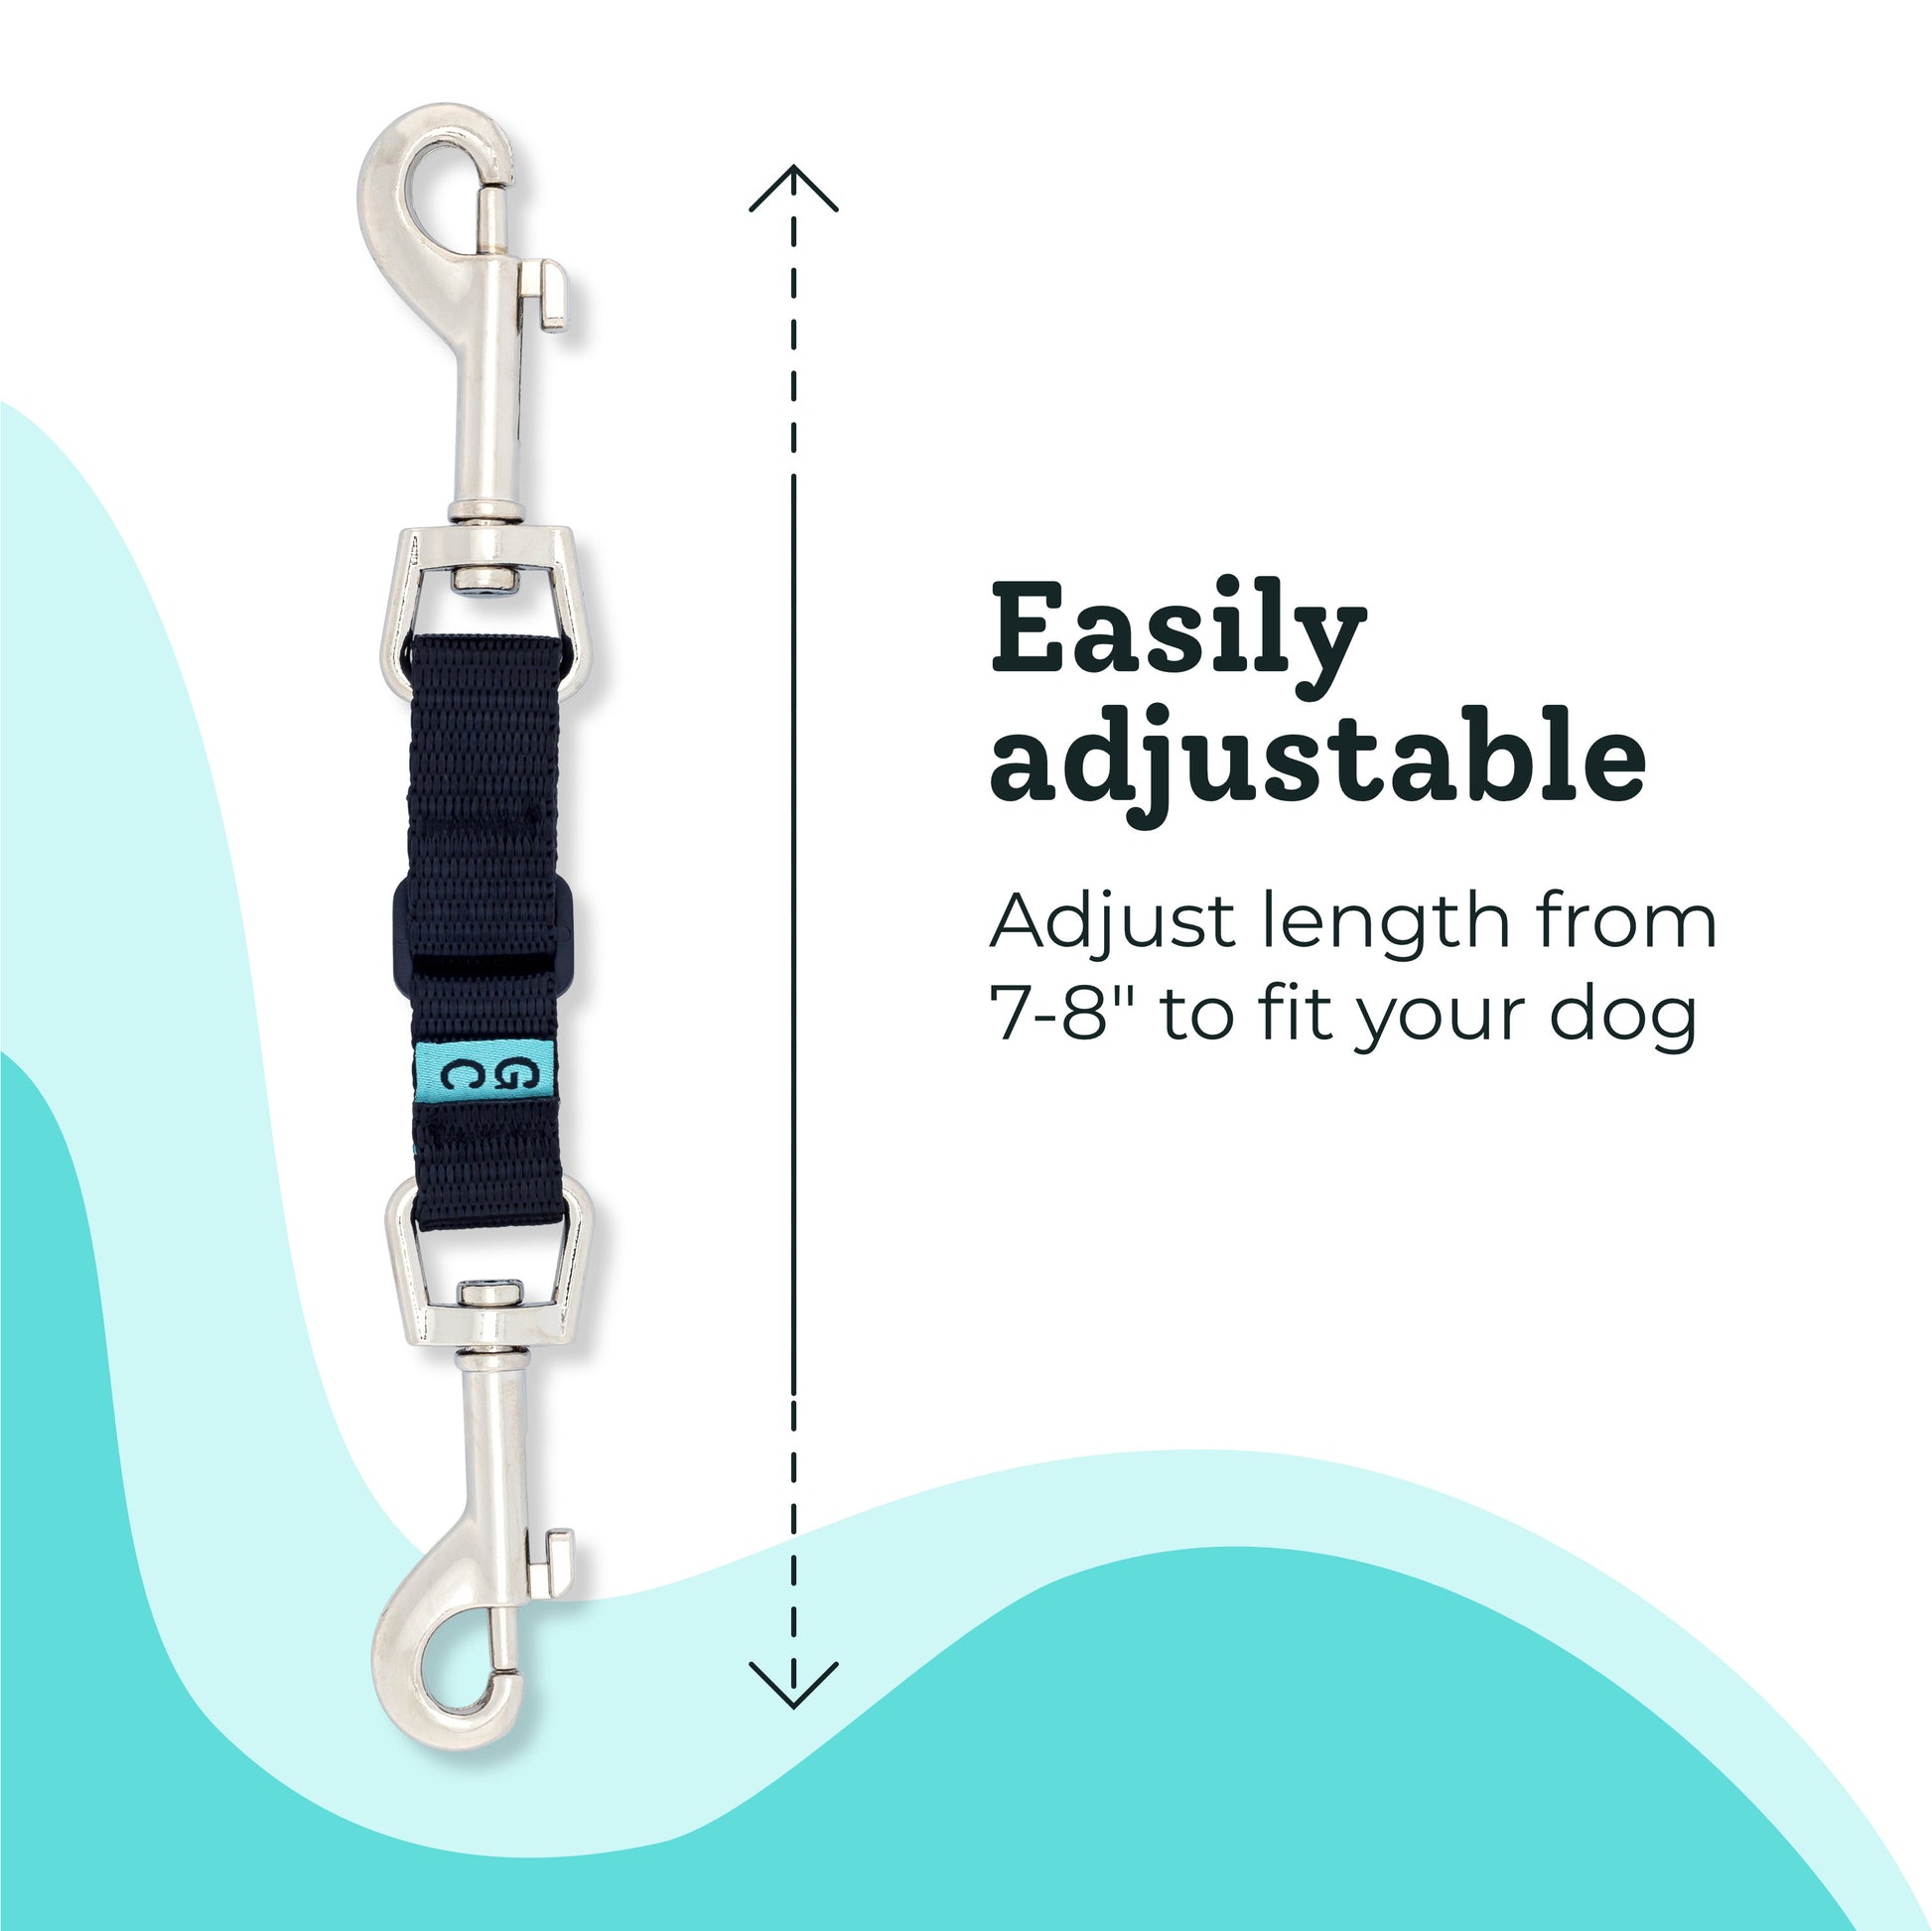 Easily adjustable - Adjust length from 7-8 inches to fit your dog